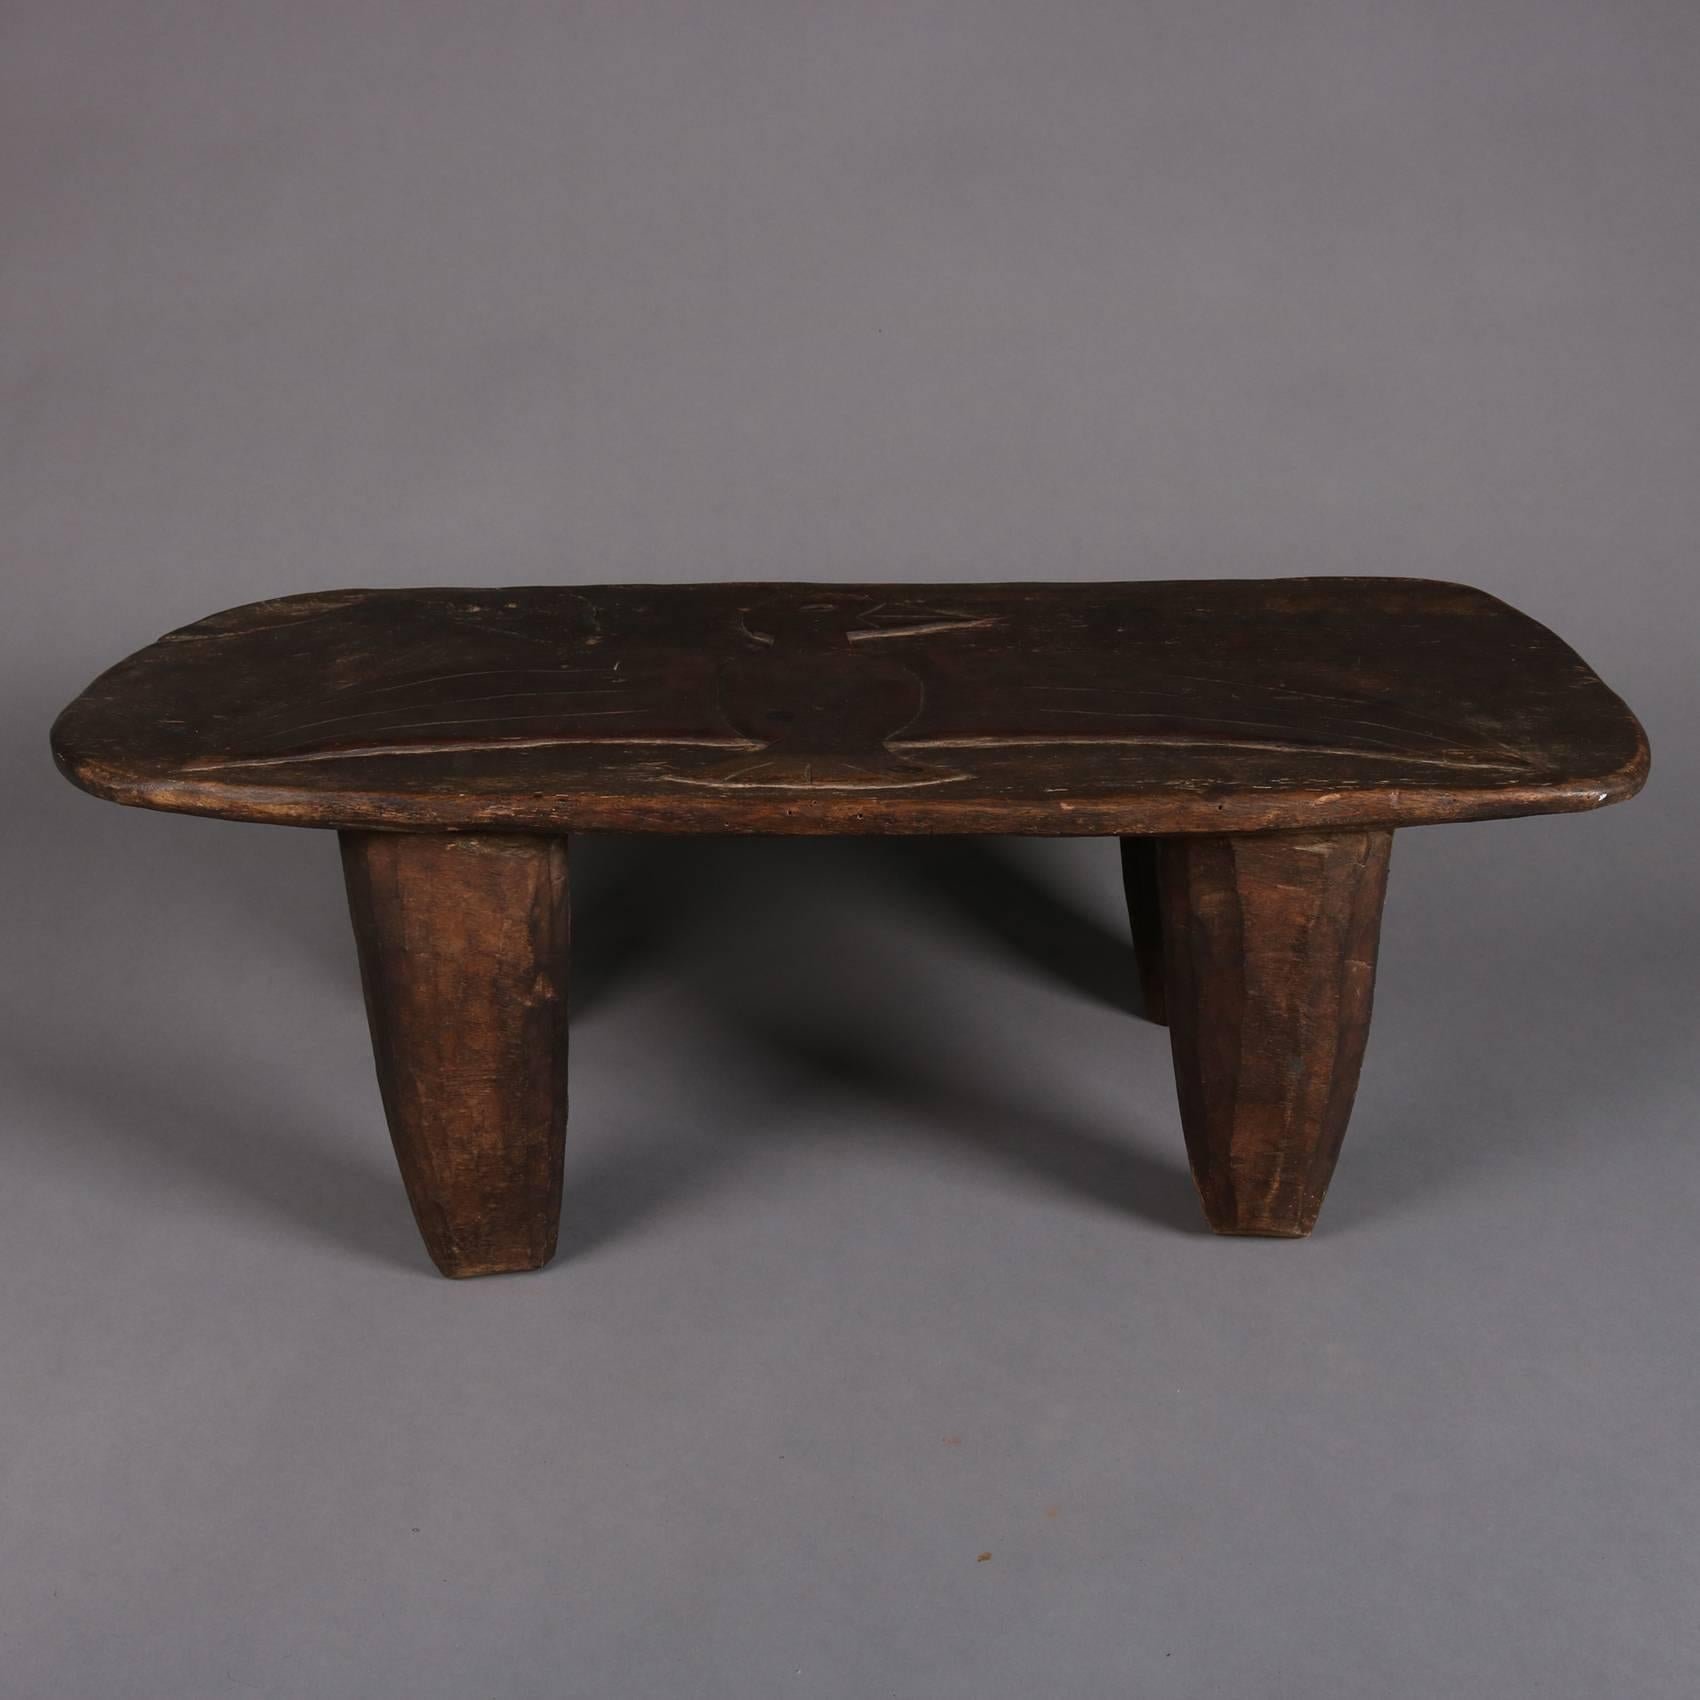 Antique Folk Art primitive low bench features plank board seat with central Oaxacan carved spread eagle and seated on four carved and tapered legs, 19th century

Measures: 10.5